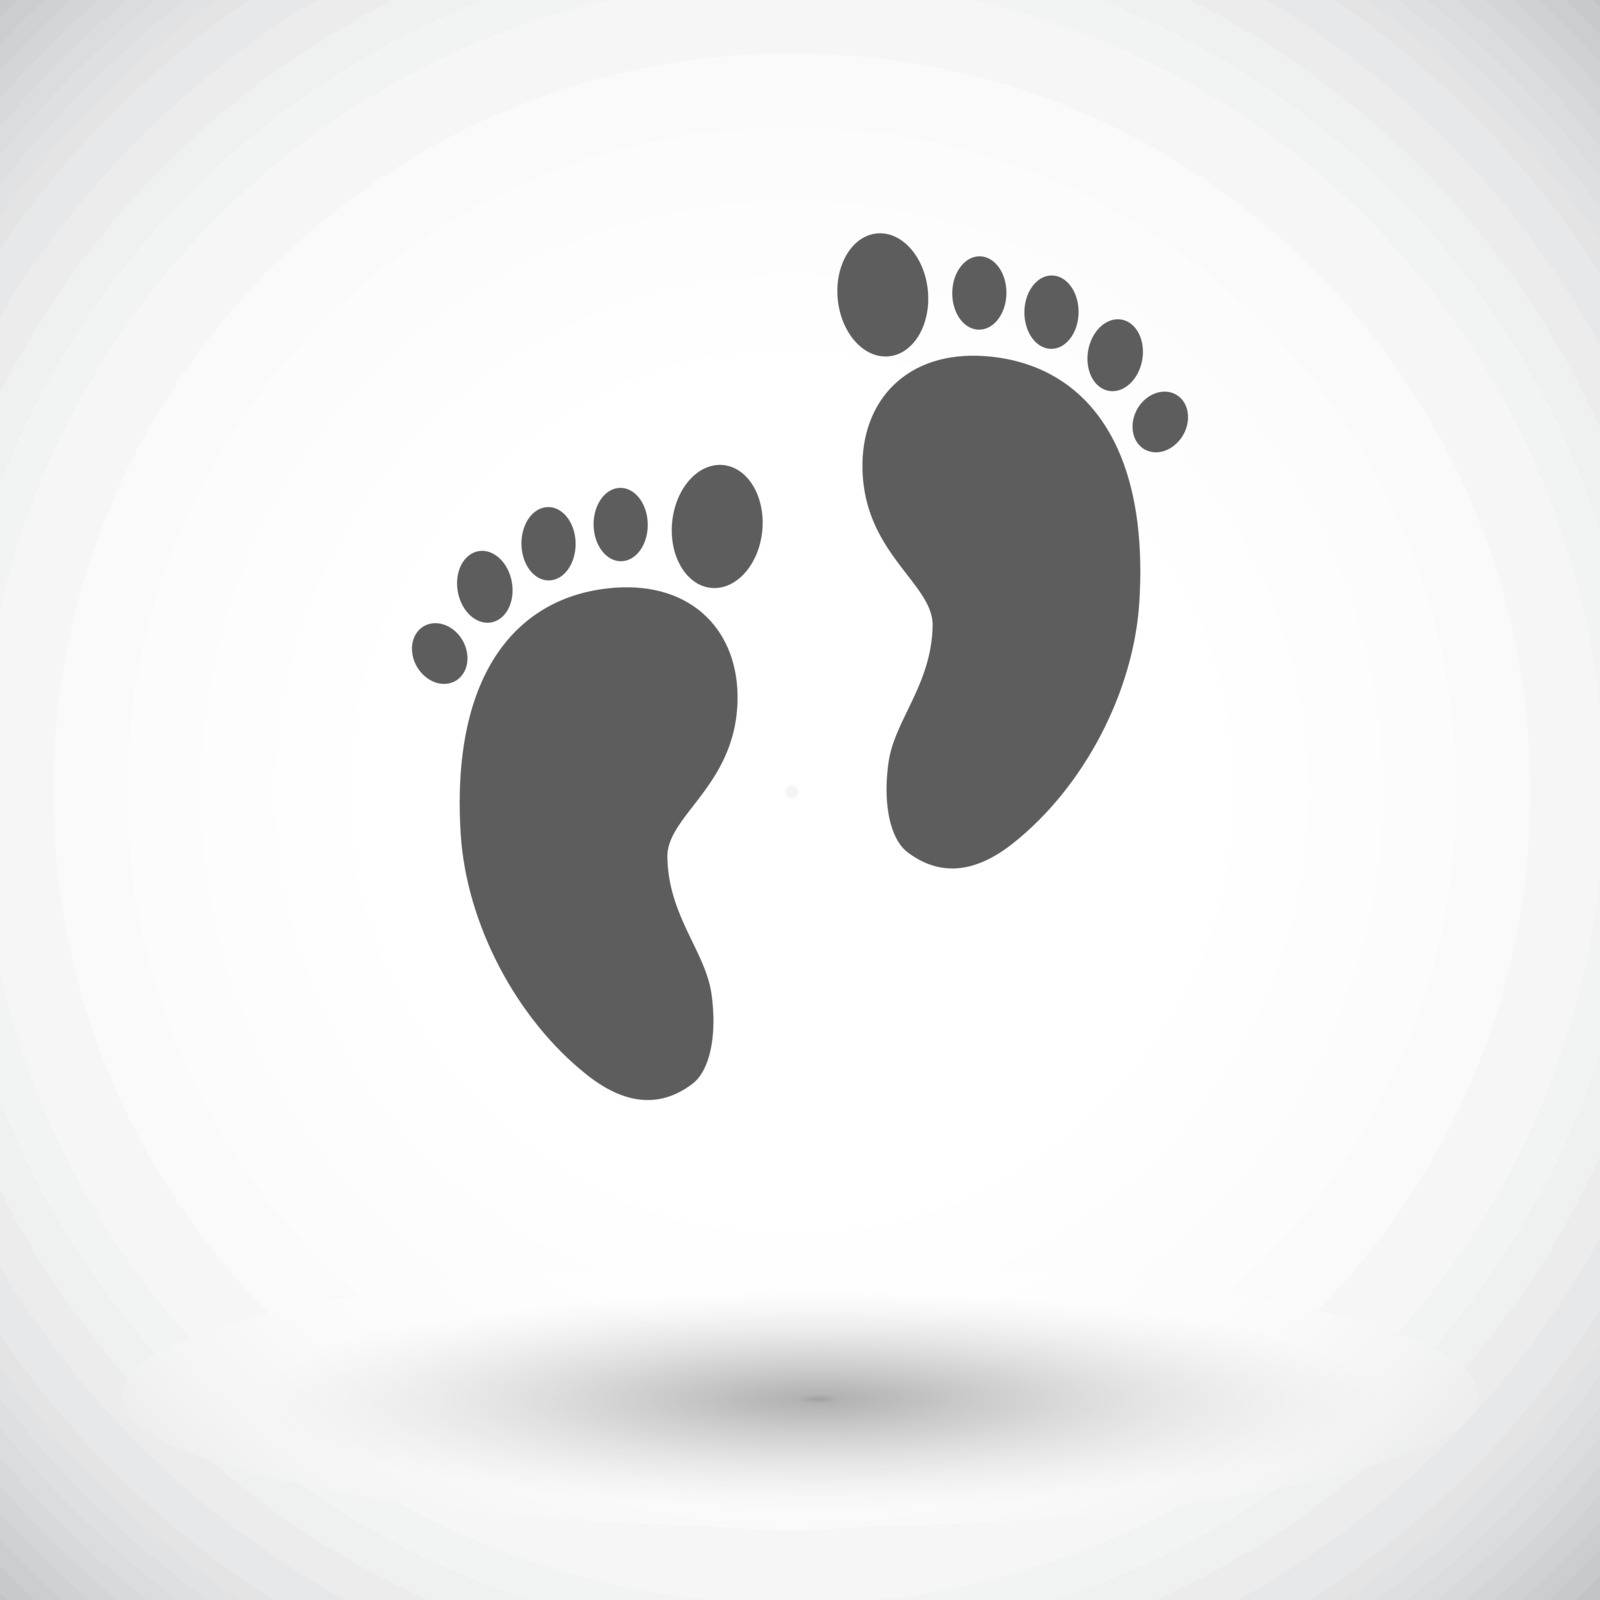 Foot icon icon. Flat vector related icon for web and mobile applications. It can be used as - logo, pictogram, icon, infographic element. Vector Illustration.